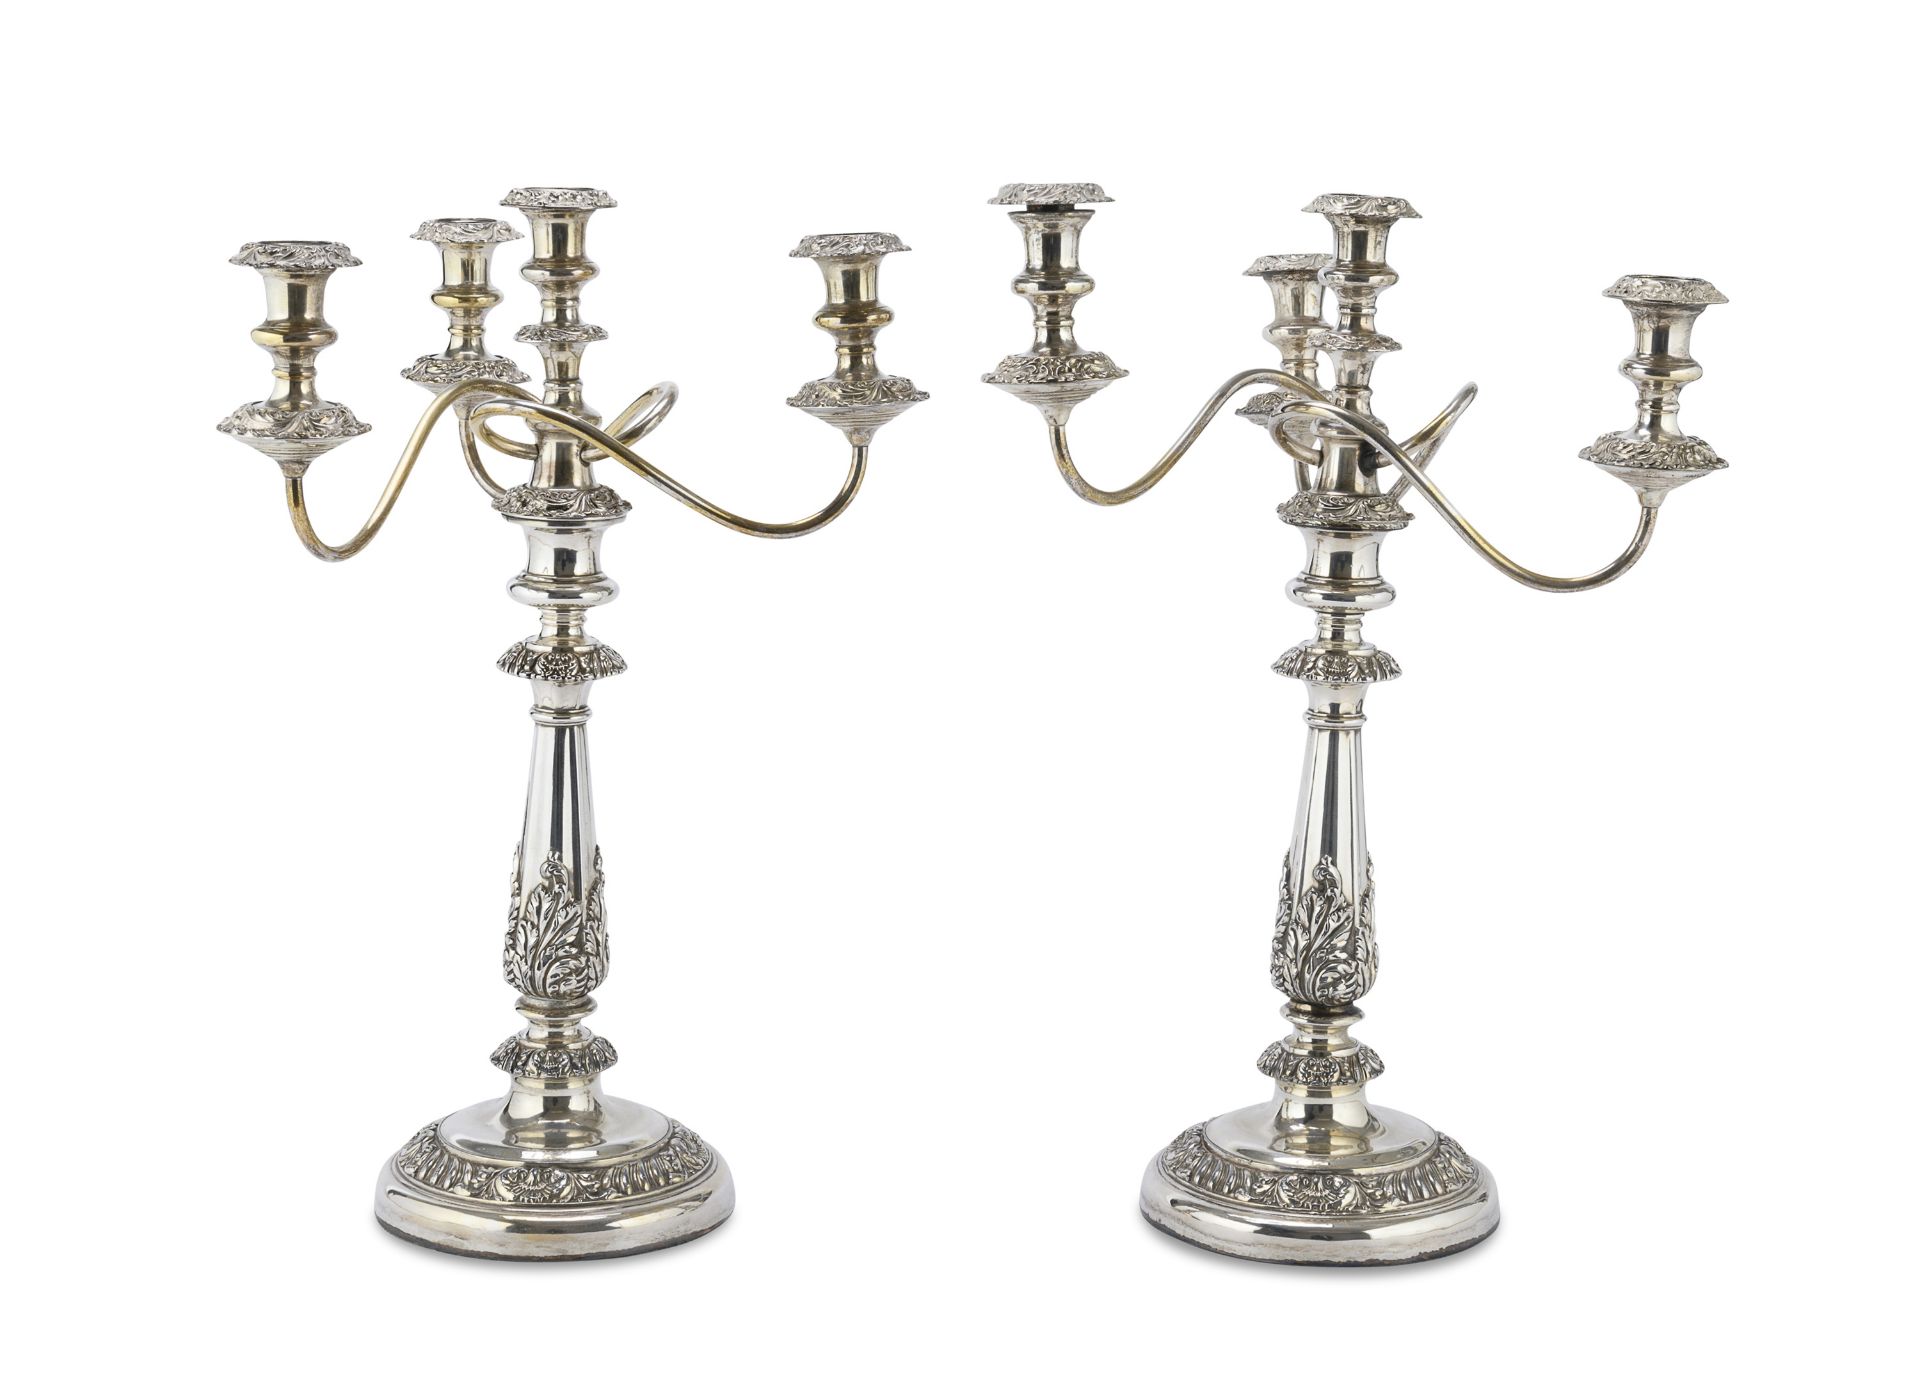 PAIR OF CANDLESTICKS IN SHEFFIELD ENGLAND EARLY 20TH CENTURY